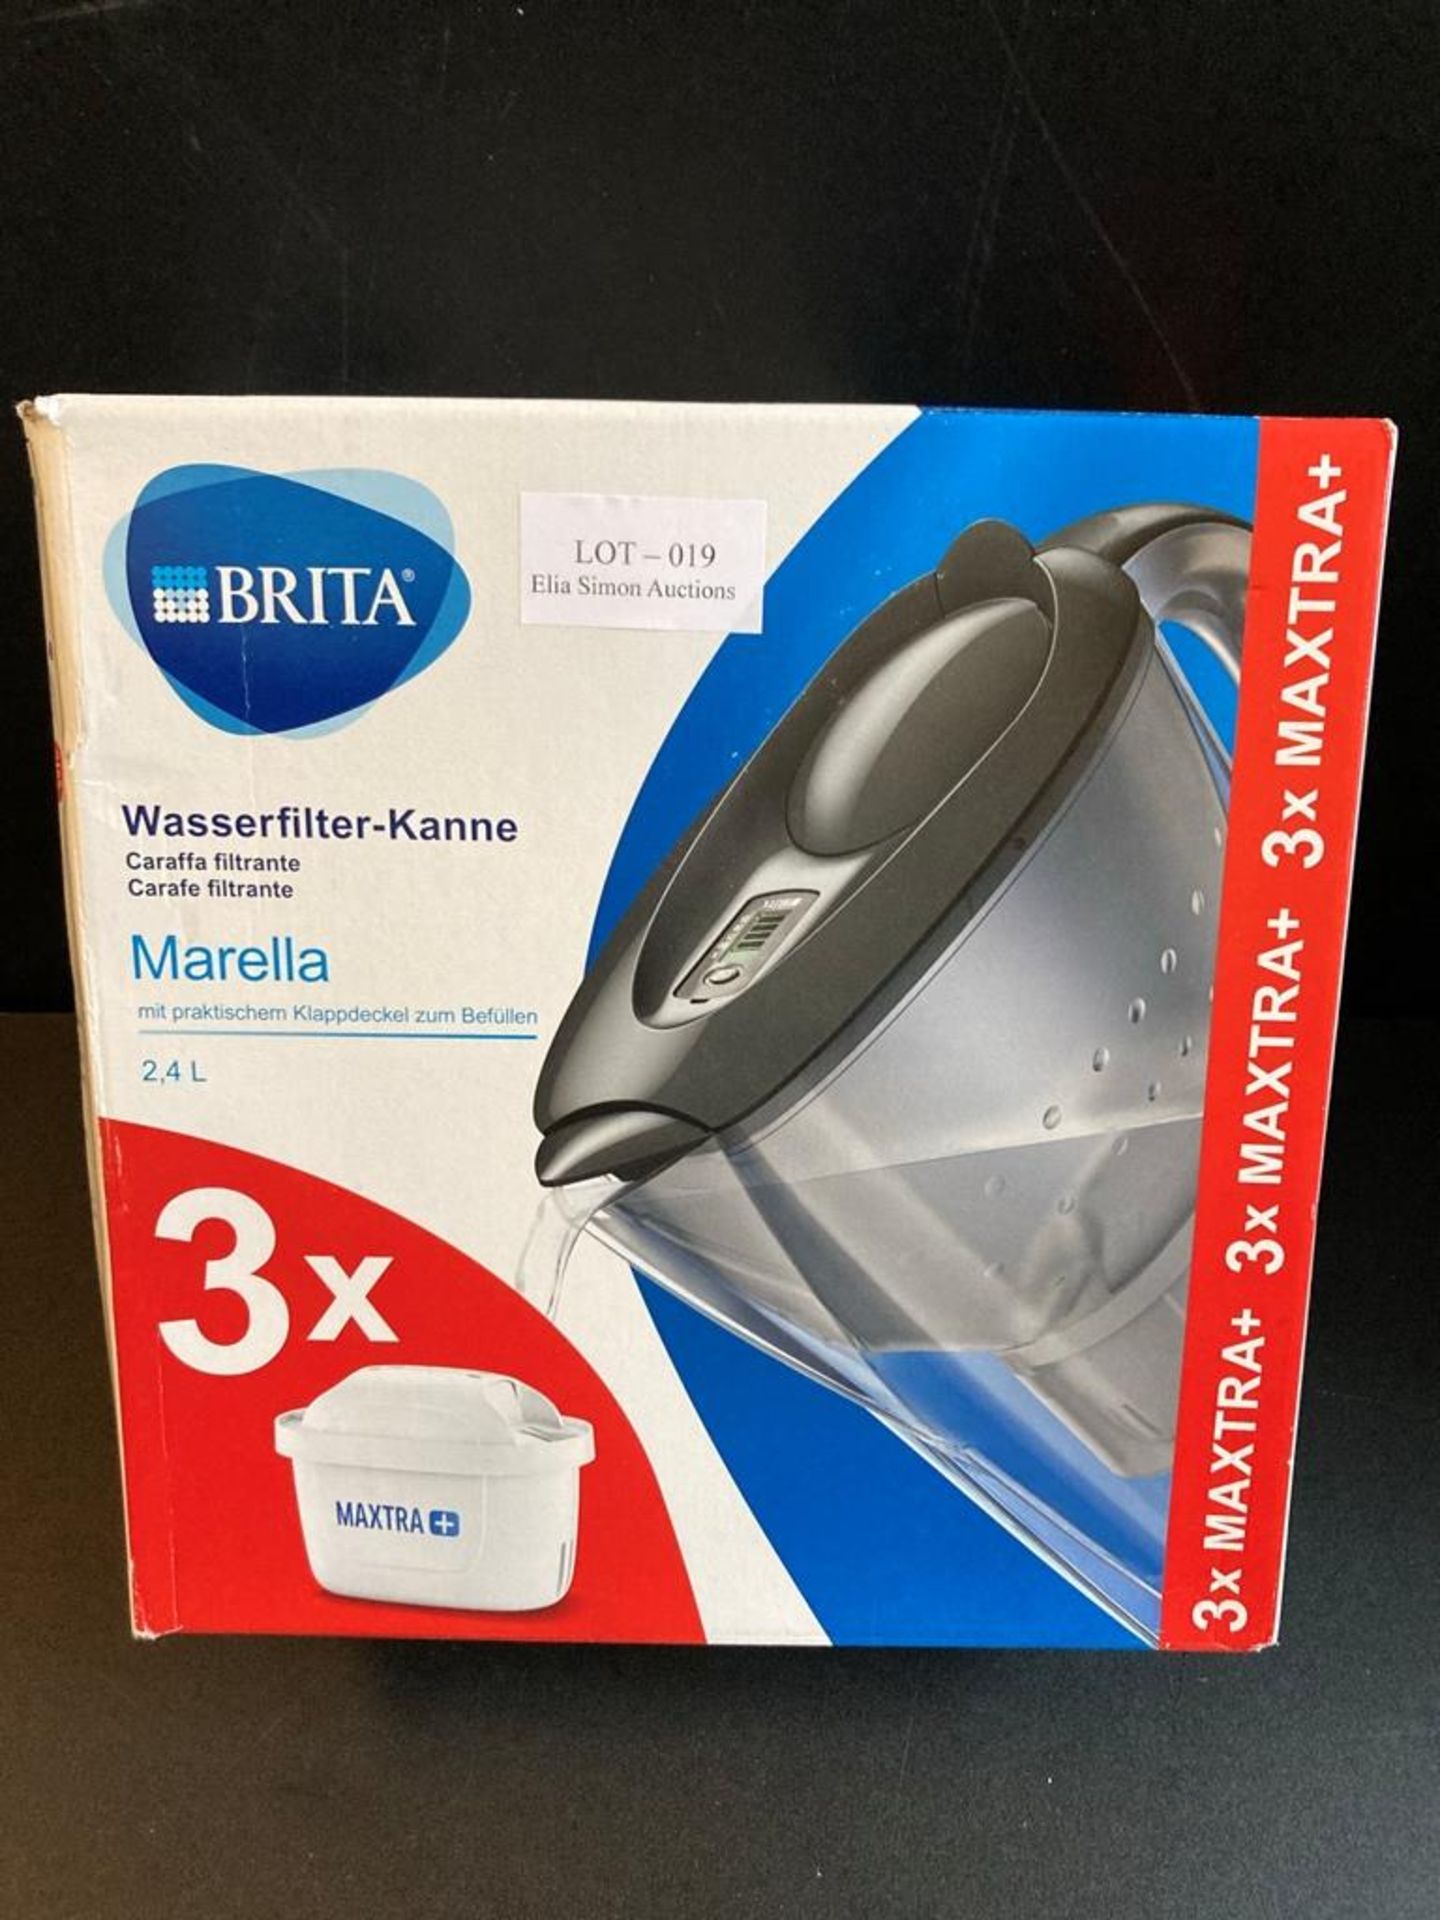 BRITA Marella Fridge water filter jug for reduction of chlorine, limescale and impuities, Graphite, - Image 2 of 2